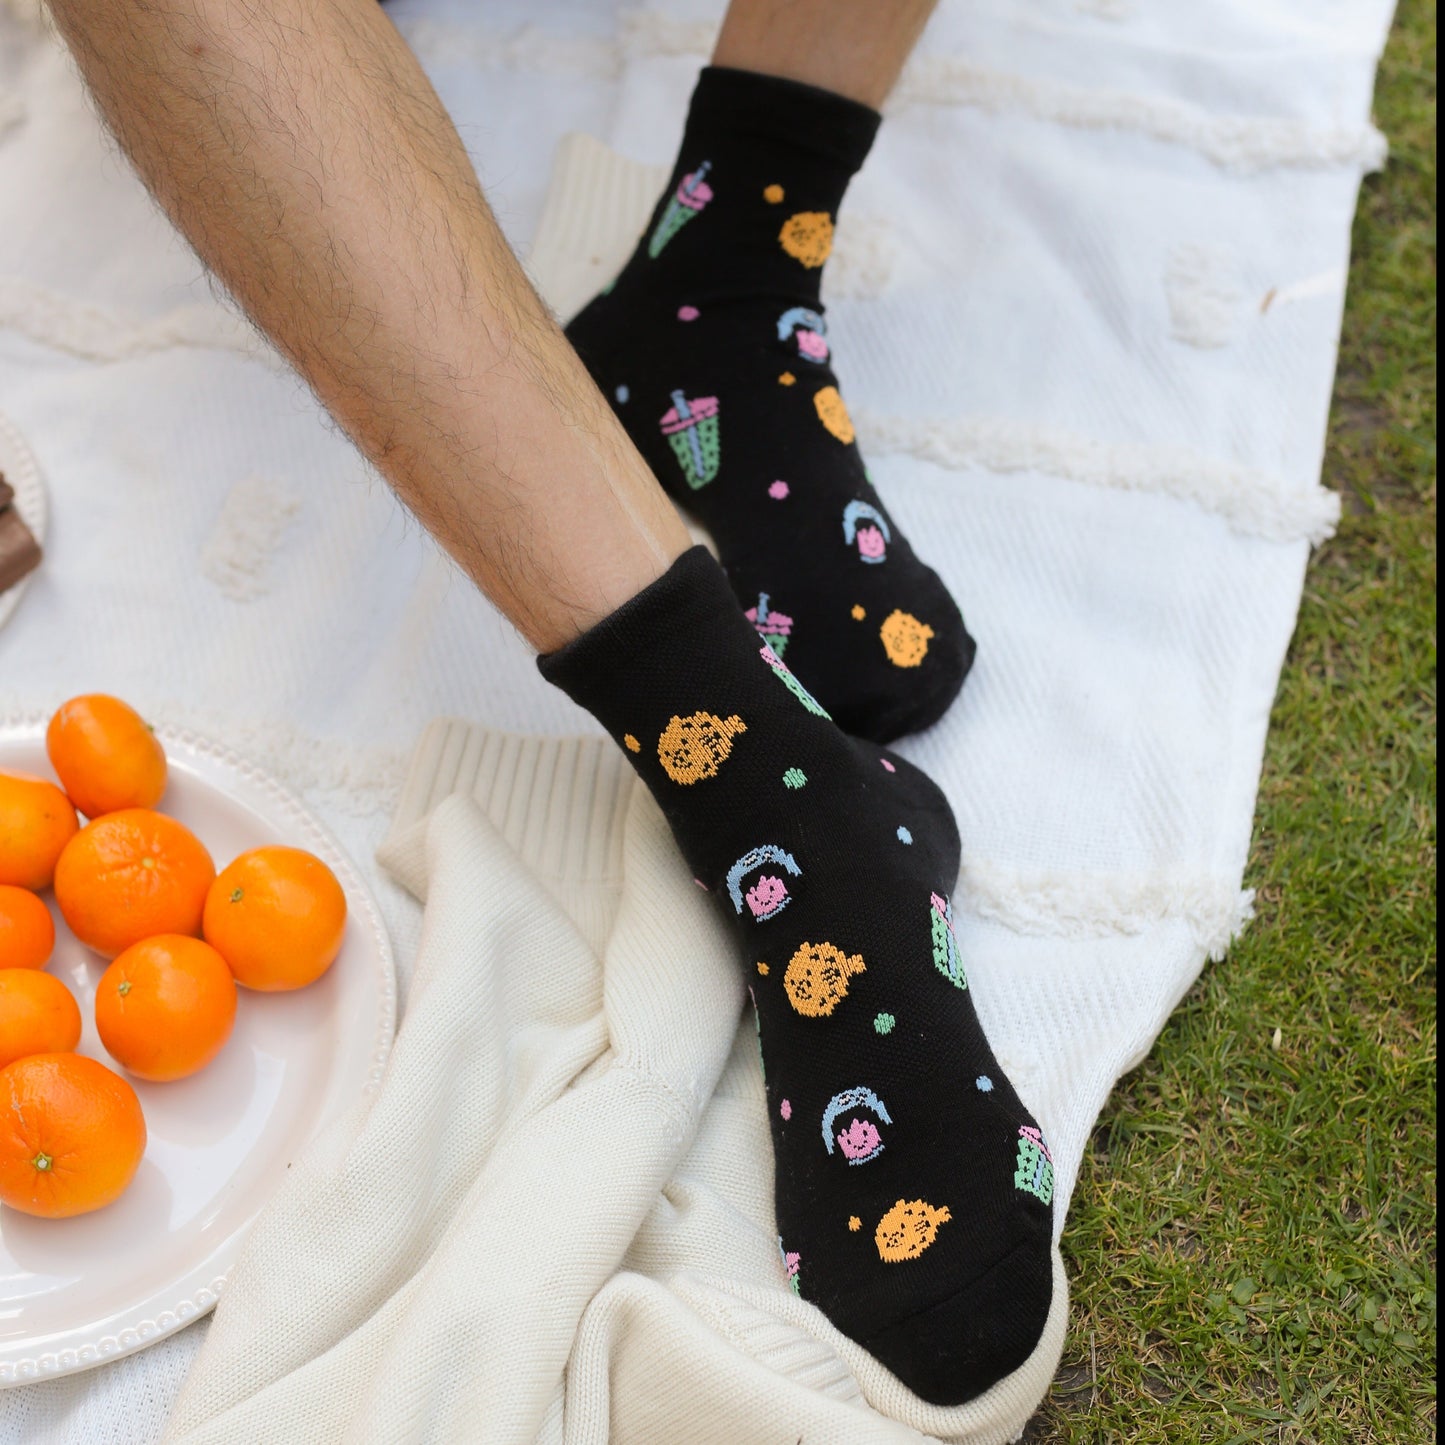 BBT Club x Paire Socks Collection